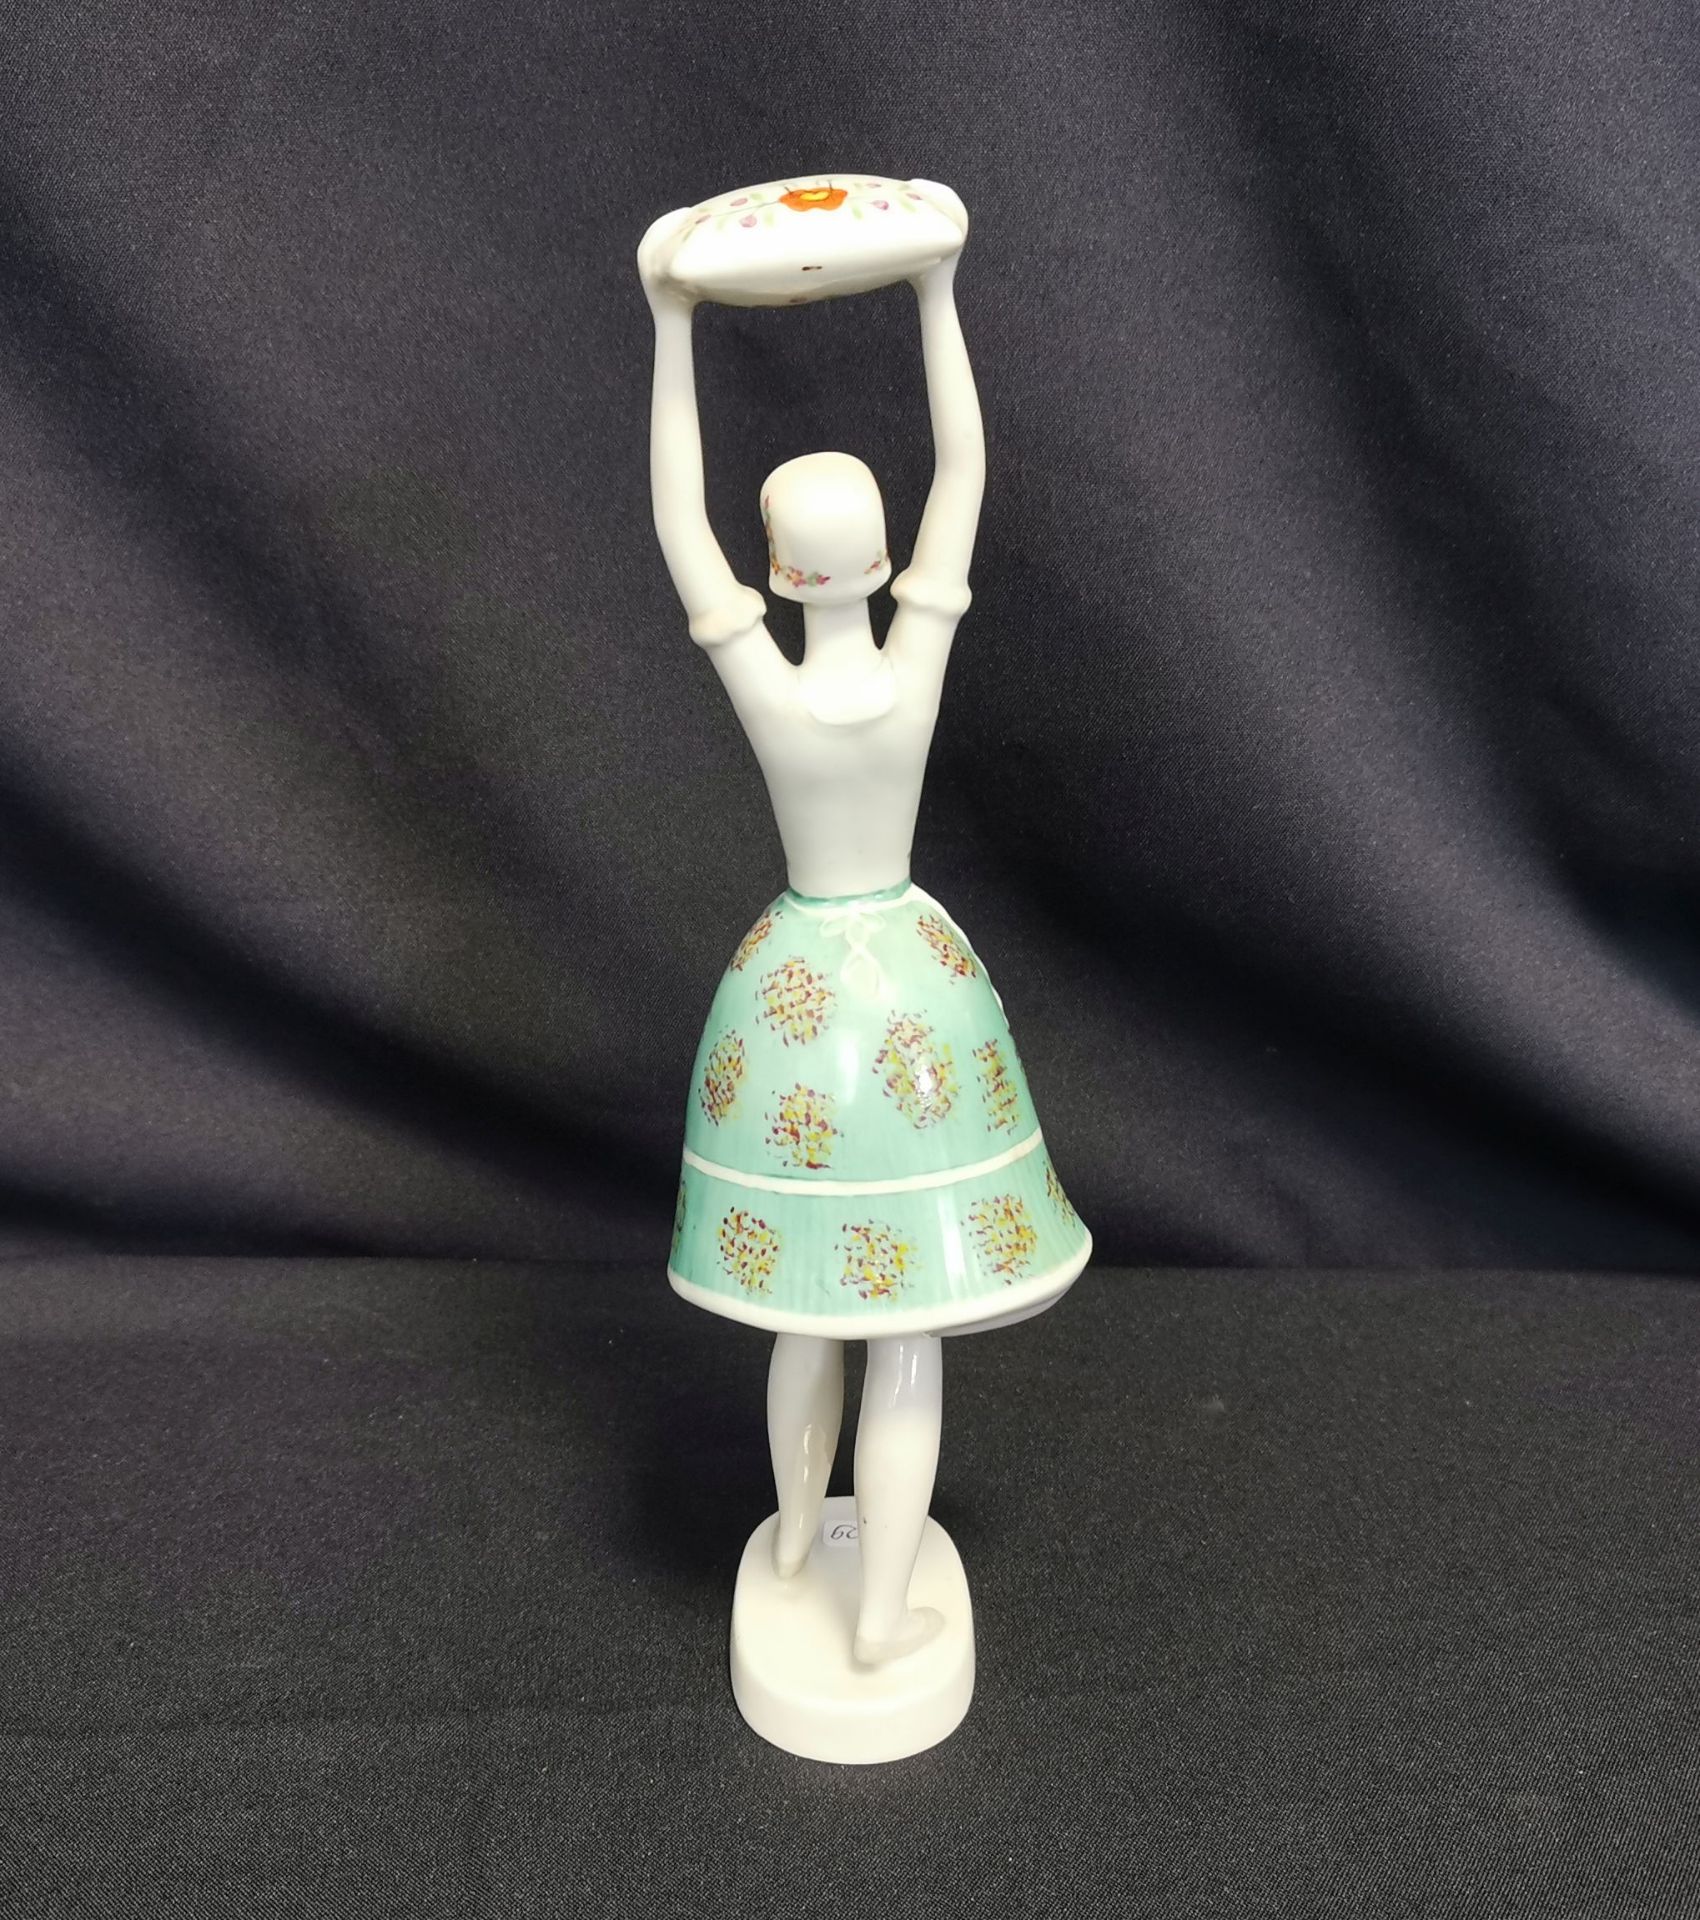 PORCELAIN FIGURINE "WOMAN IN TRADITIONAL COSTUME" - Image 3 of 5